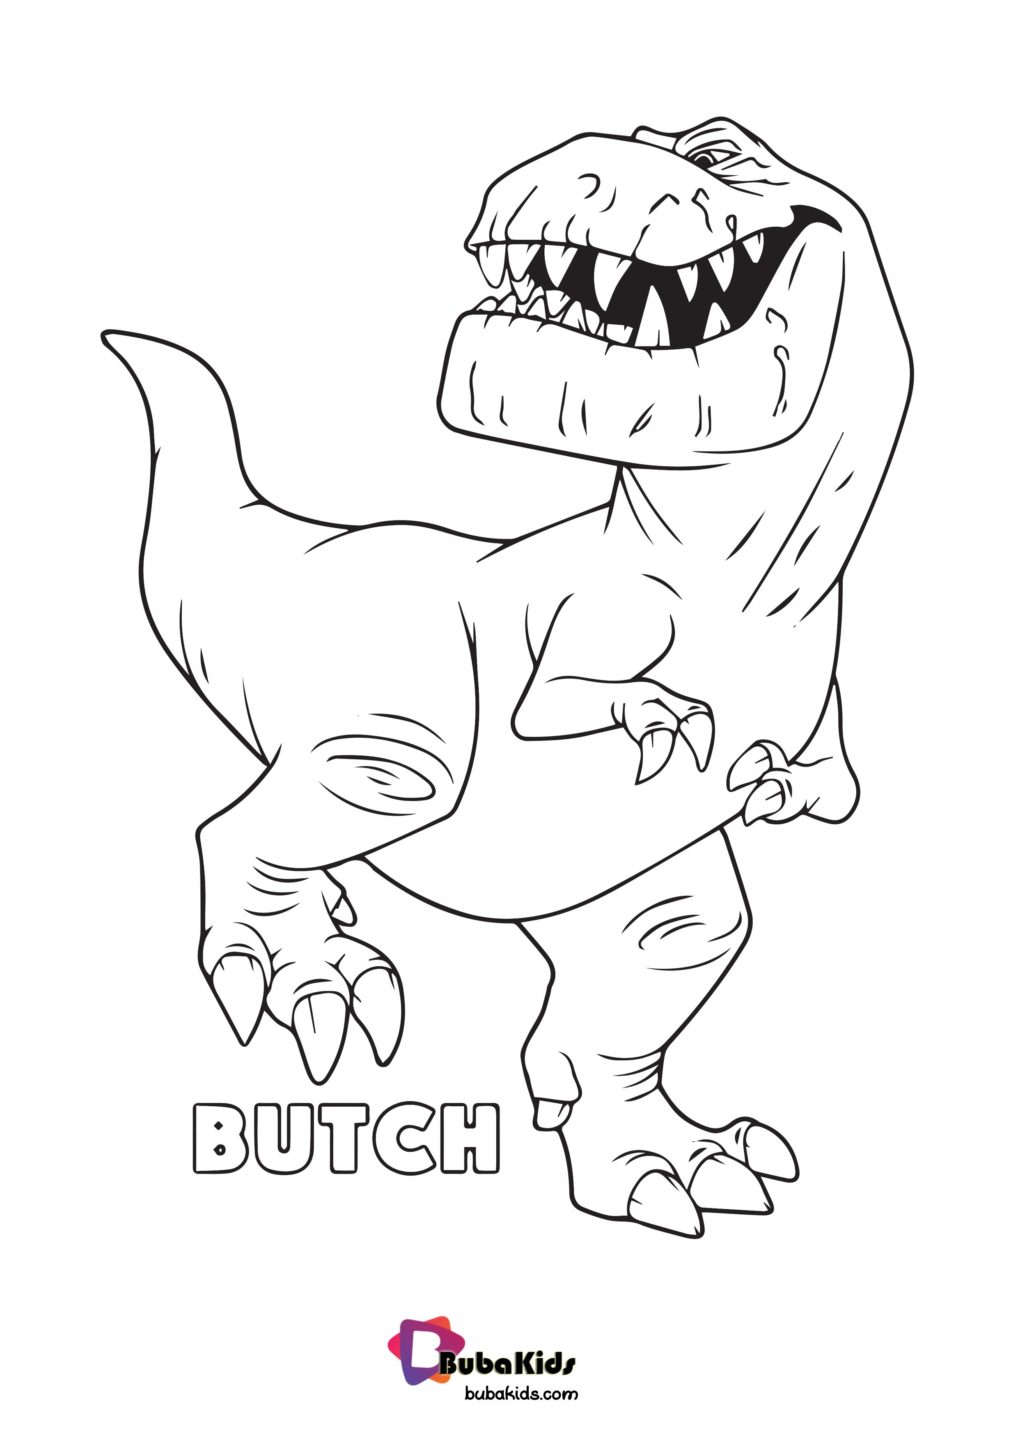 Butch Trex Dinosaurs Coloring Page